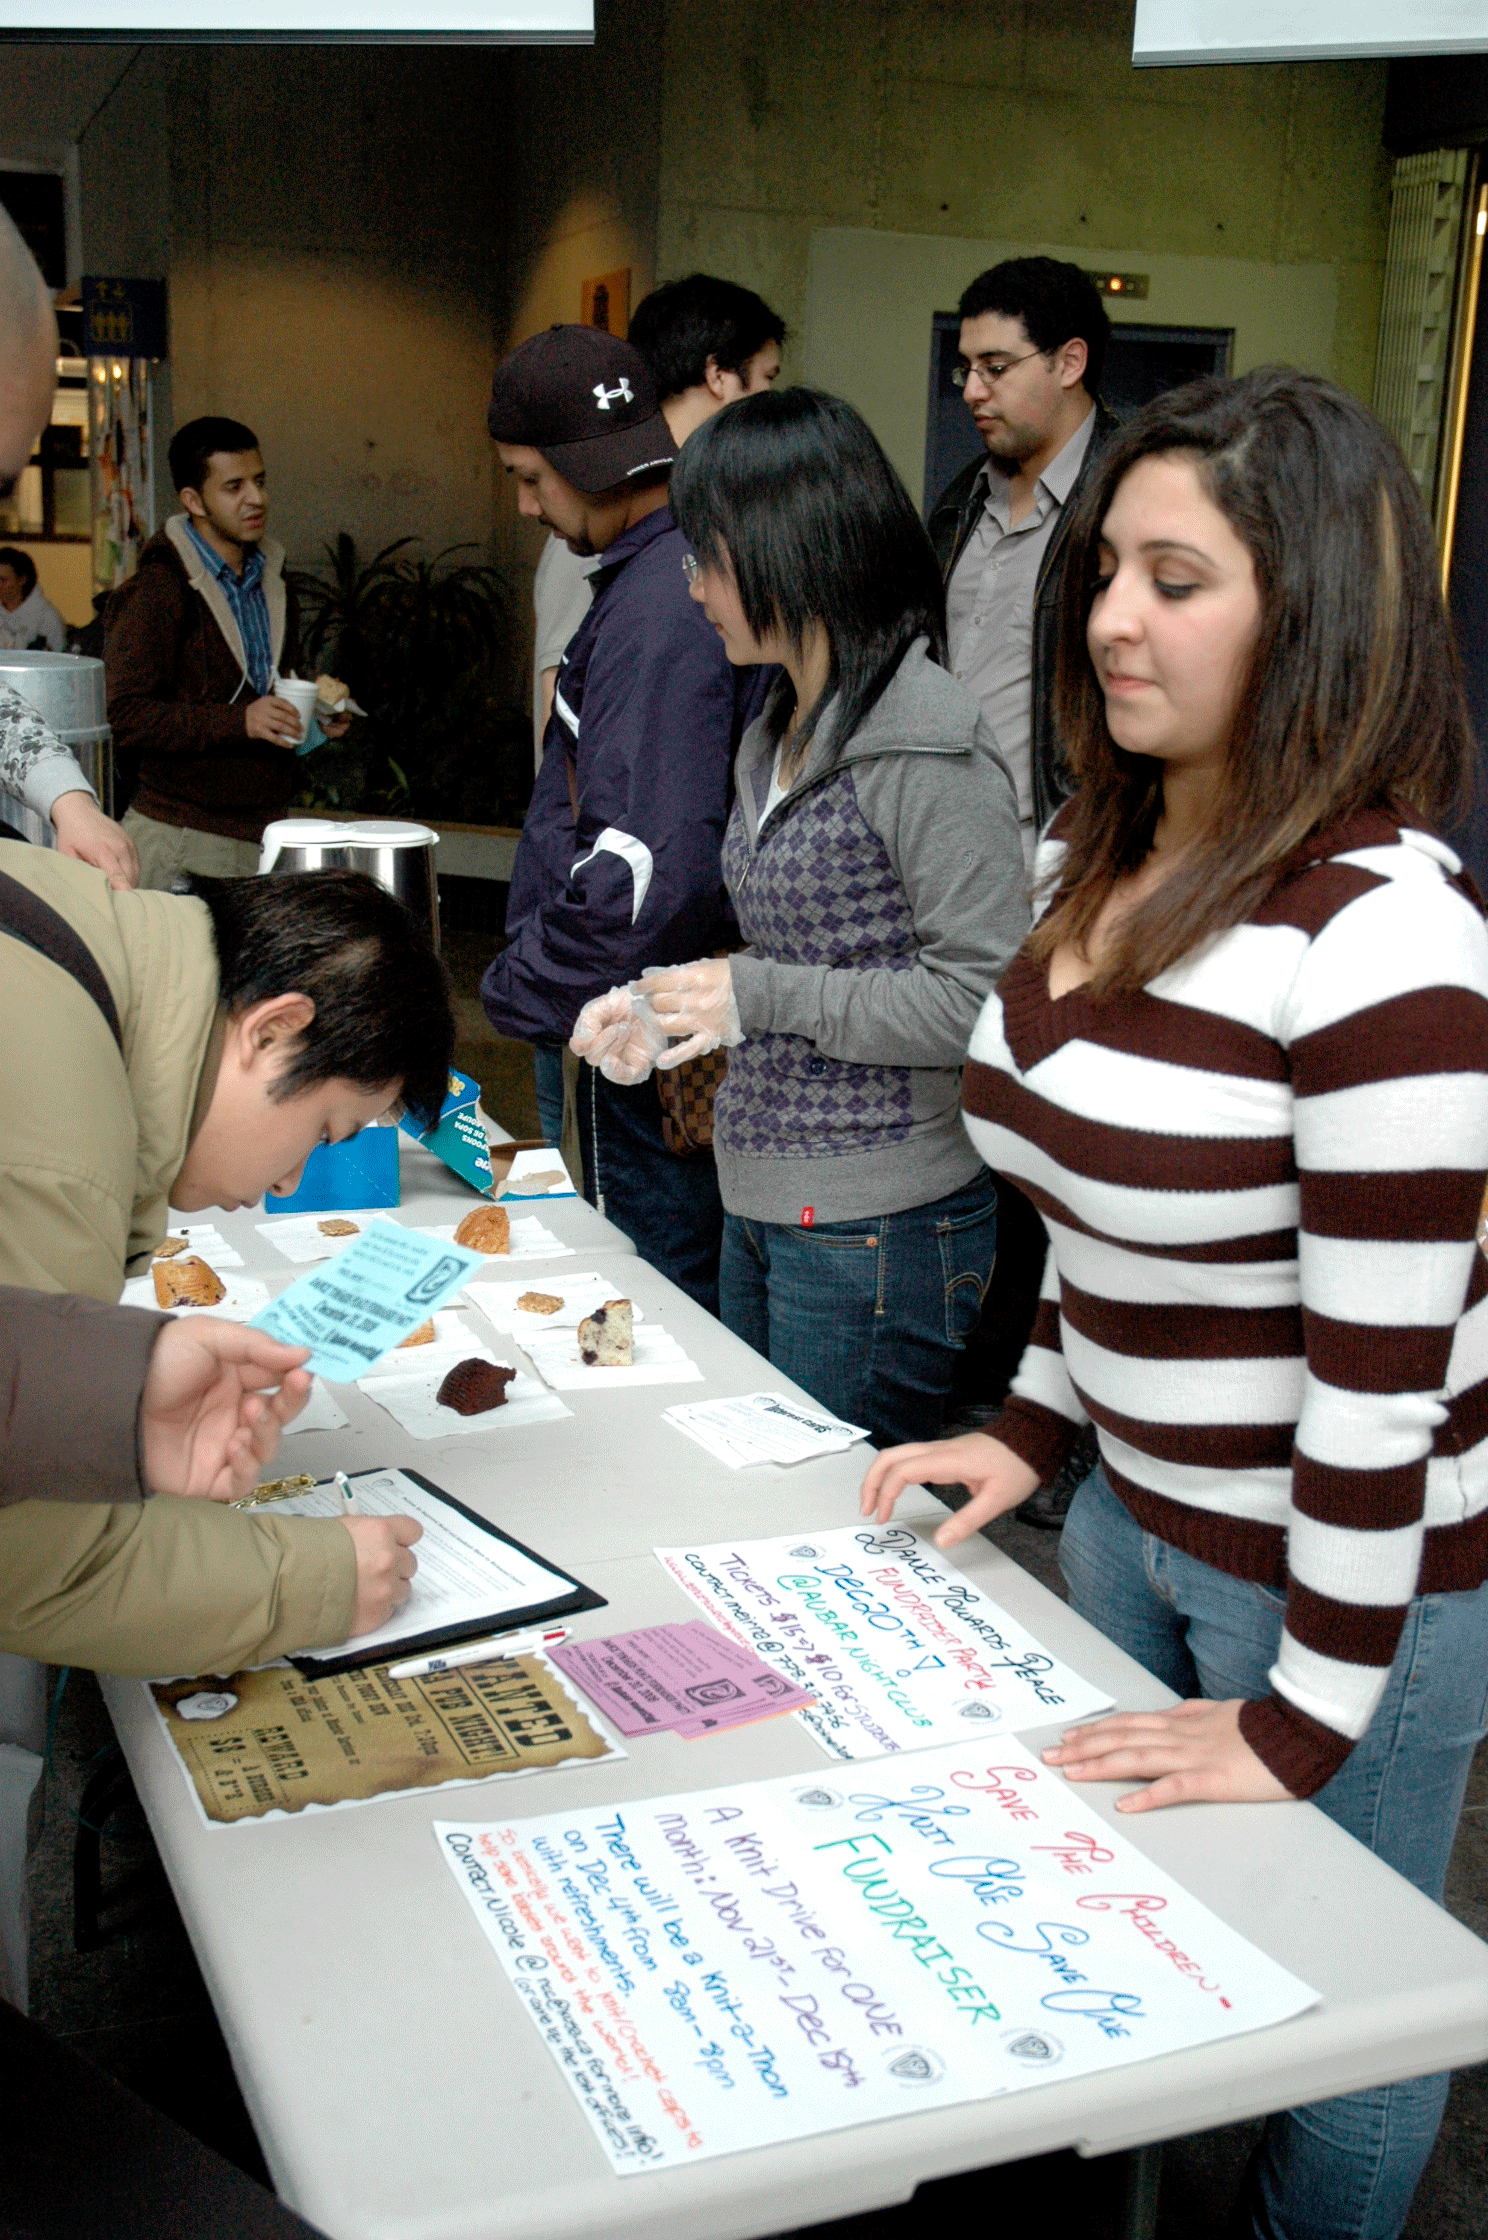 The KSA's Meirna Said asks students to sign a petition for more student space. (Joseph Gloria photo)